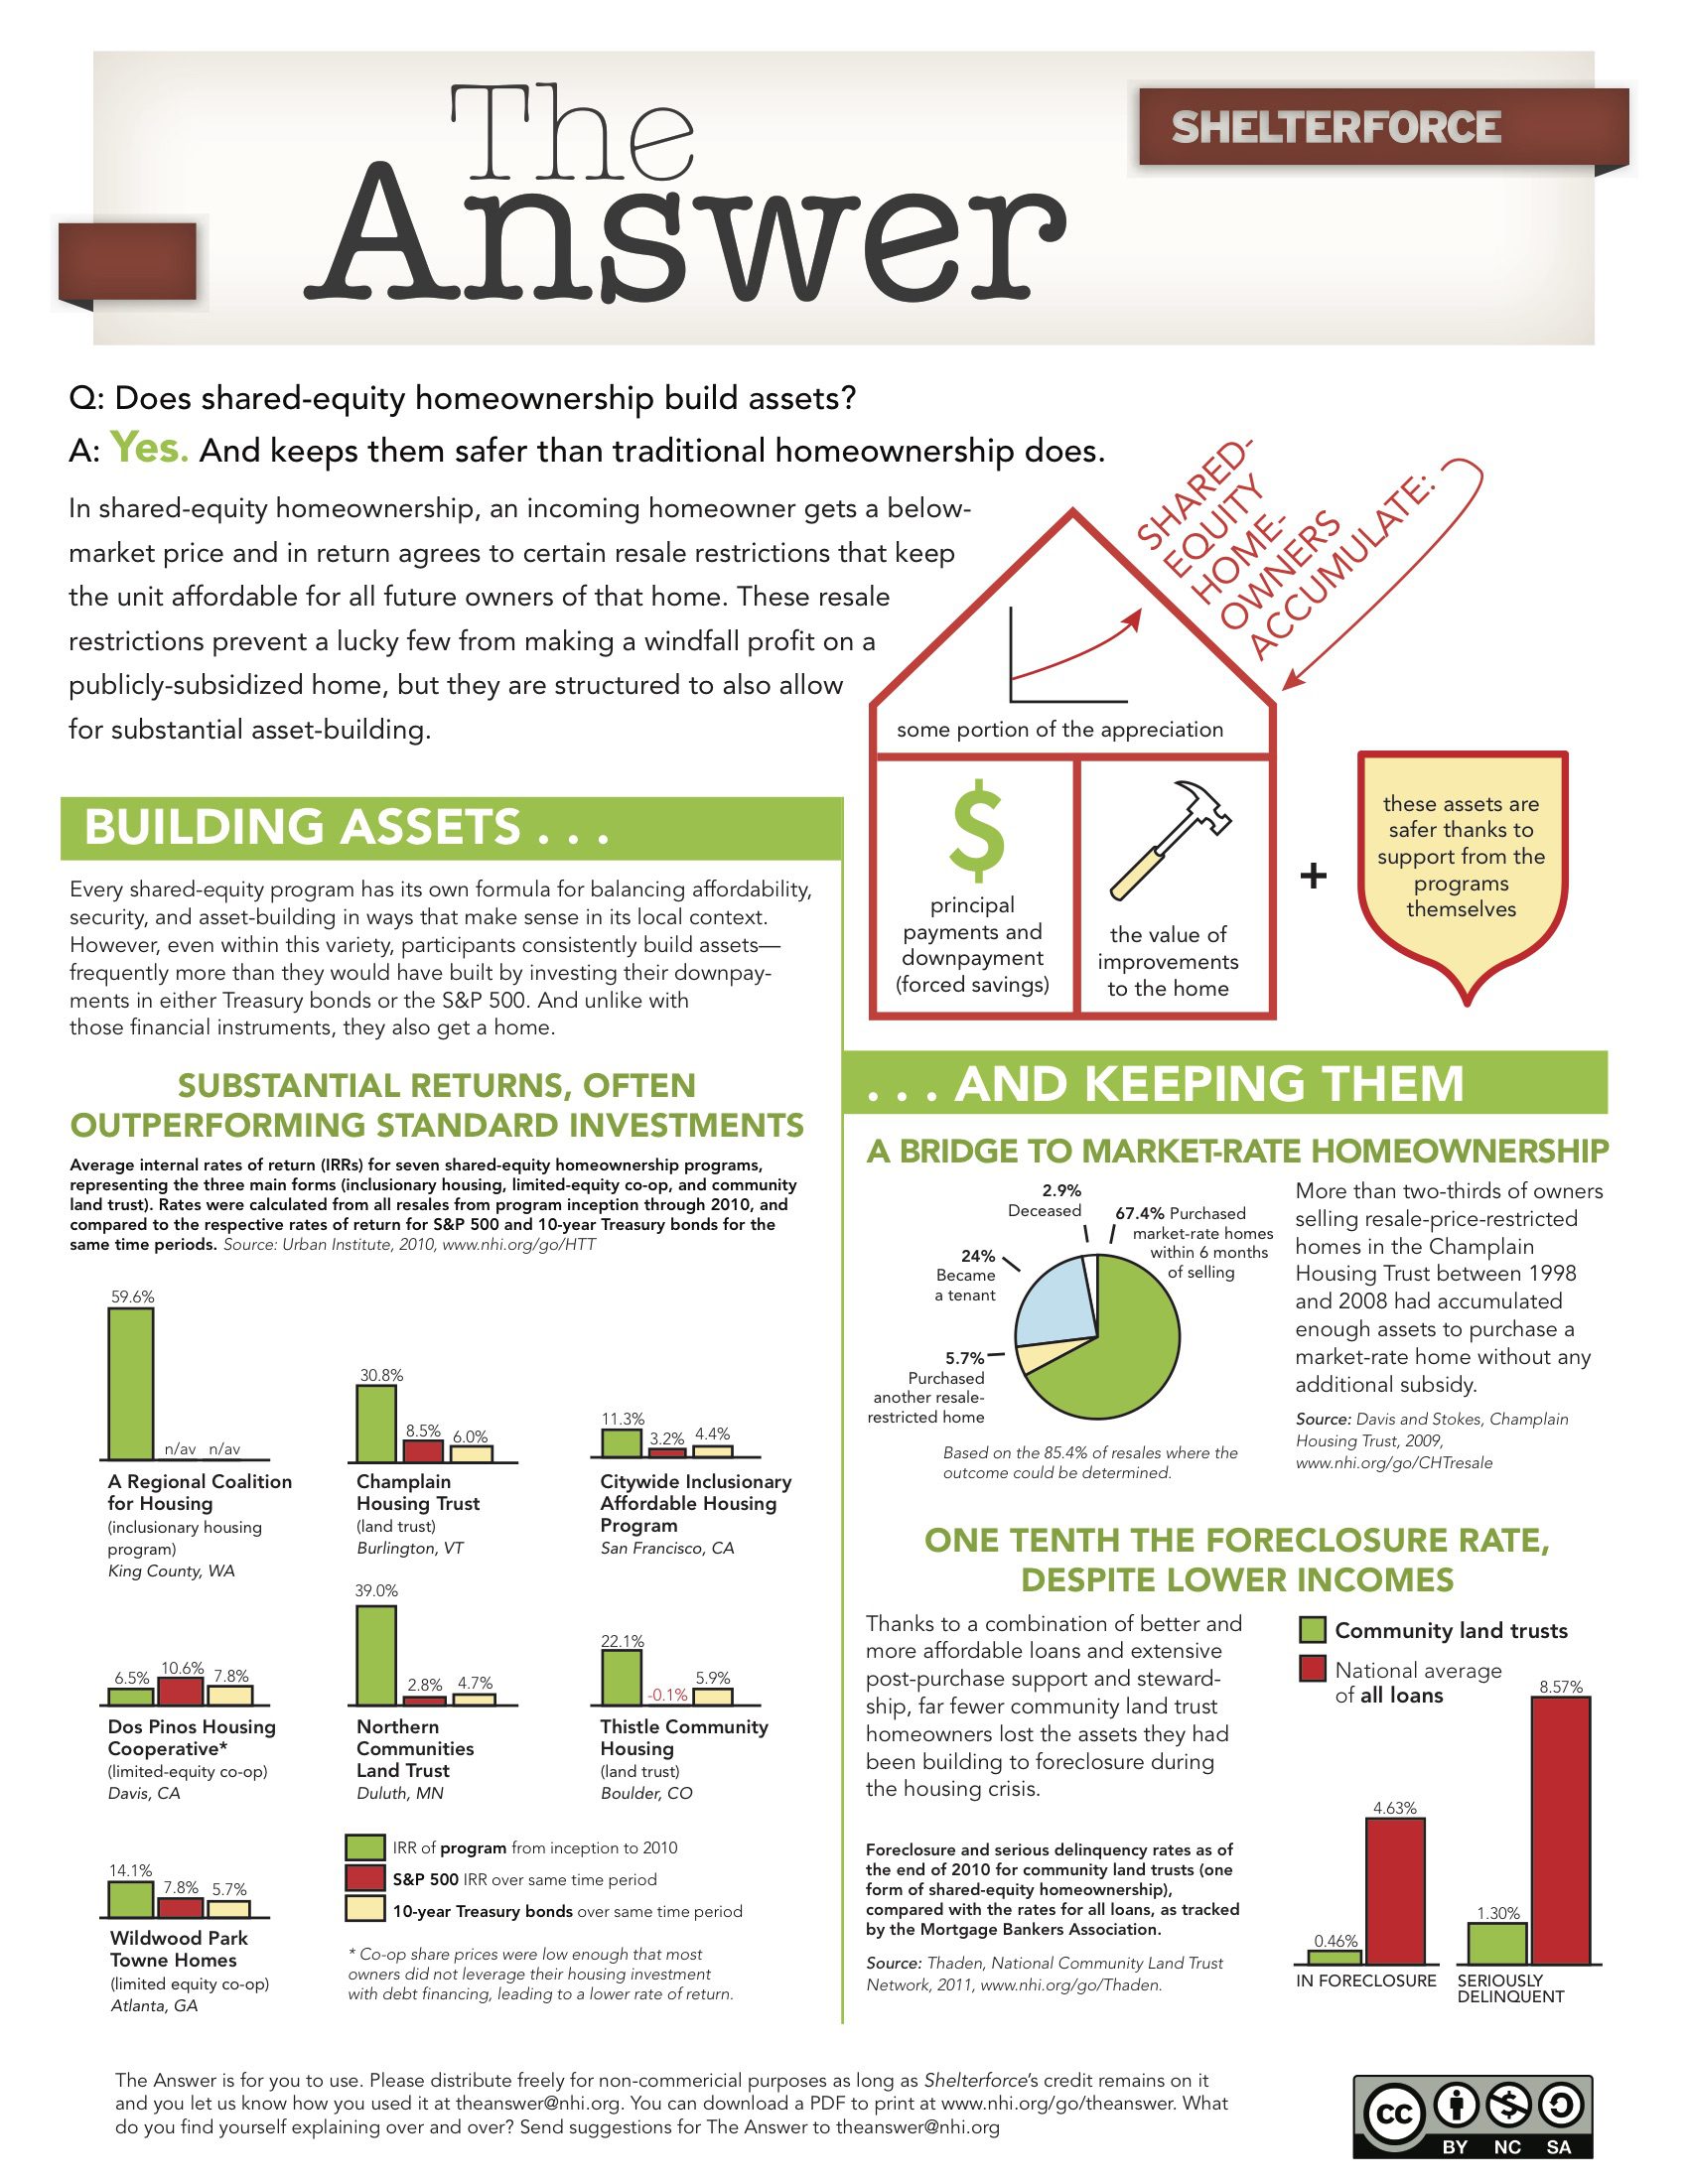 Does shared-equity homeownership build assets? Yes. And keeps them safer than traditional homeownership does. Various graphs and charts follow to back up this assertion. Image links to pdf version.